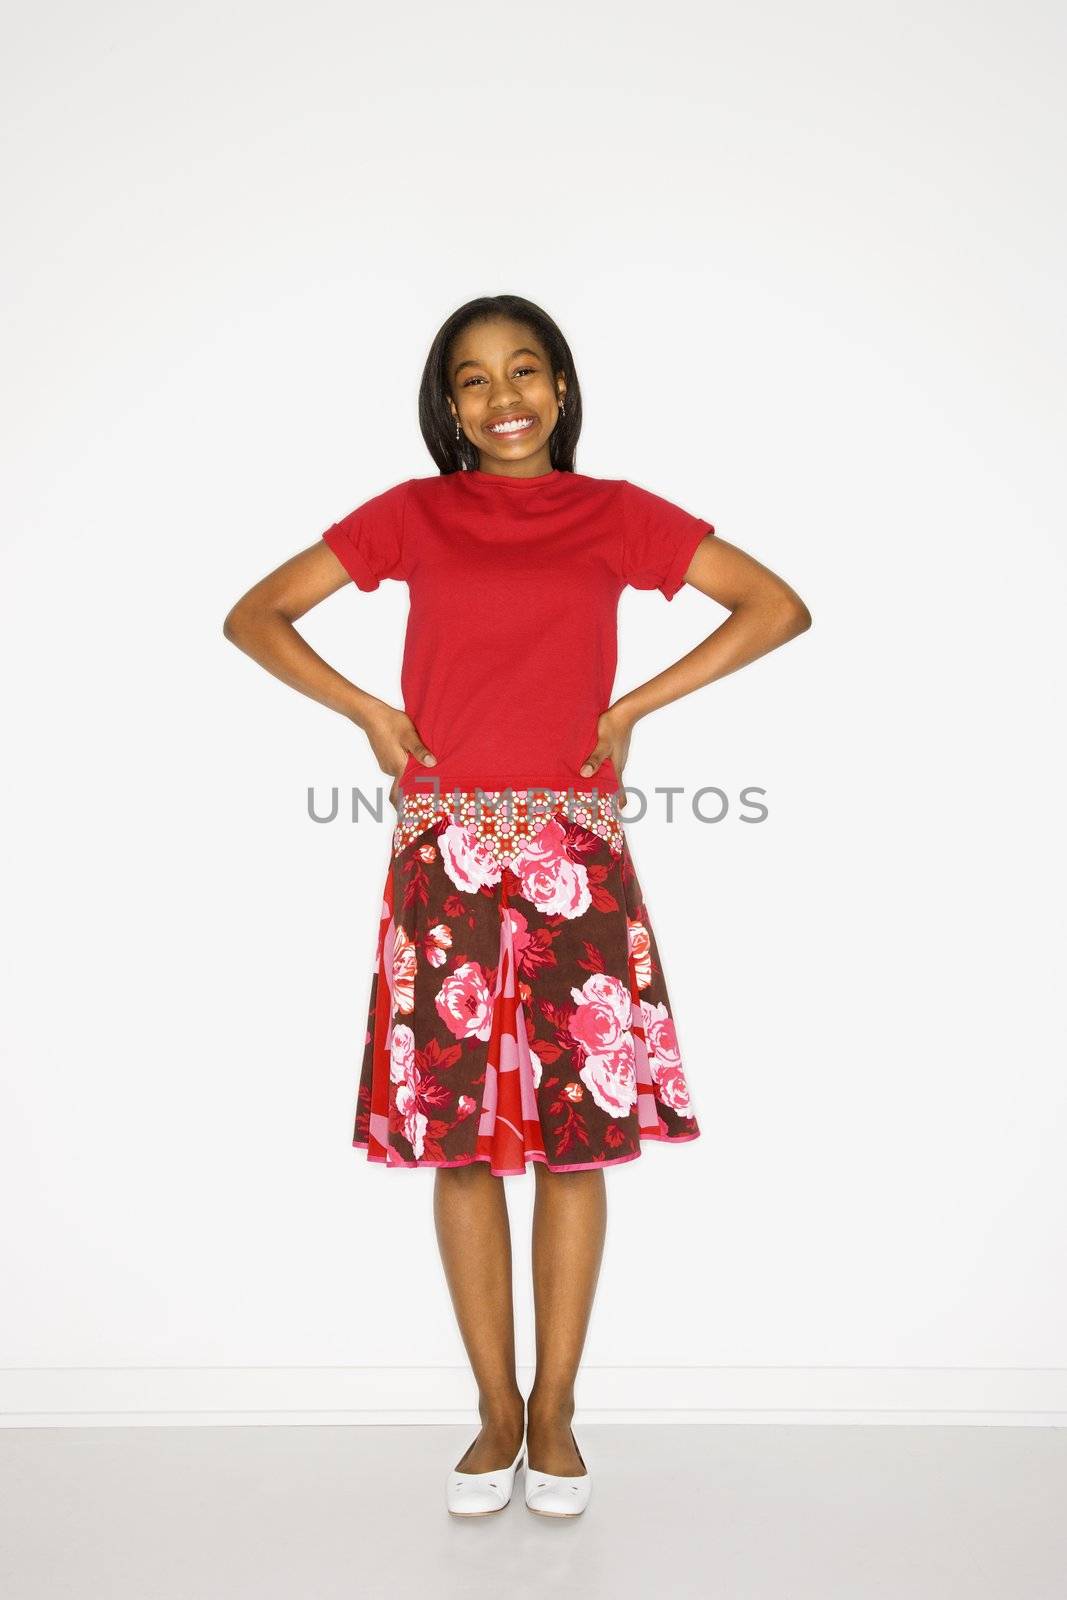 Portrait of African-American teen girl standing with hands on her hips against white background.